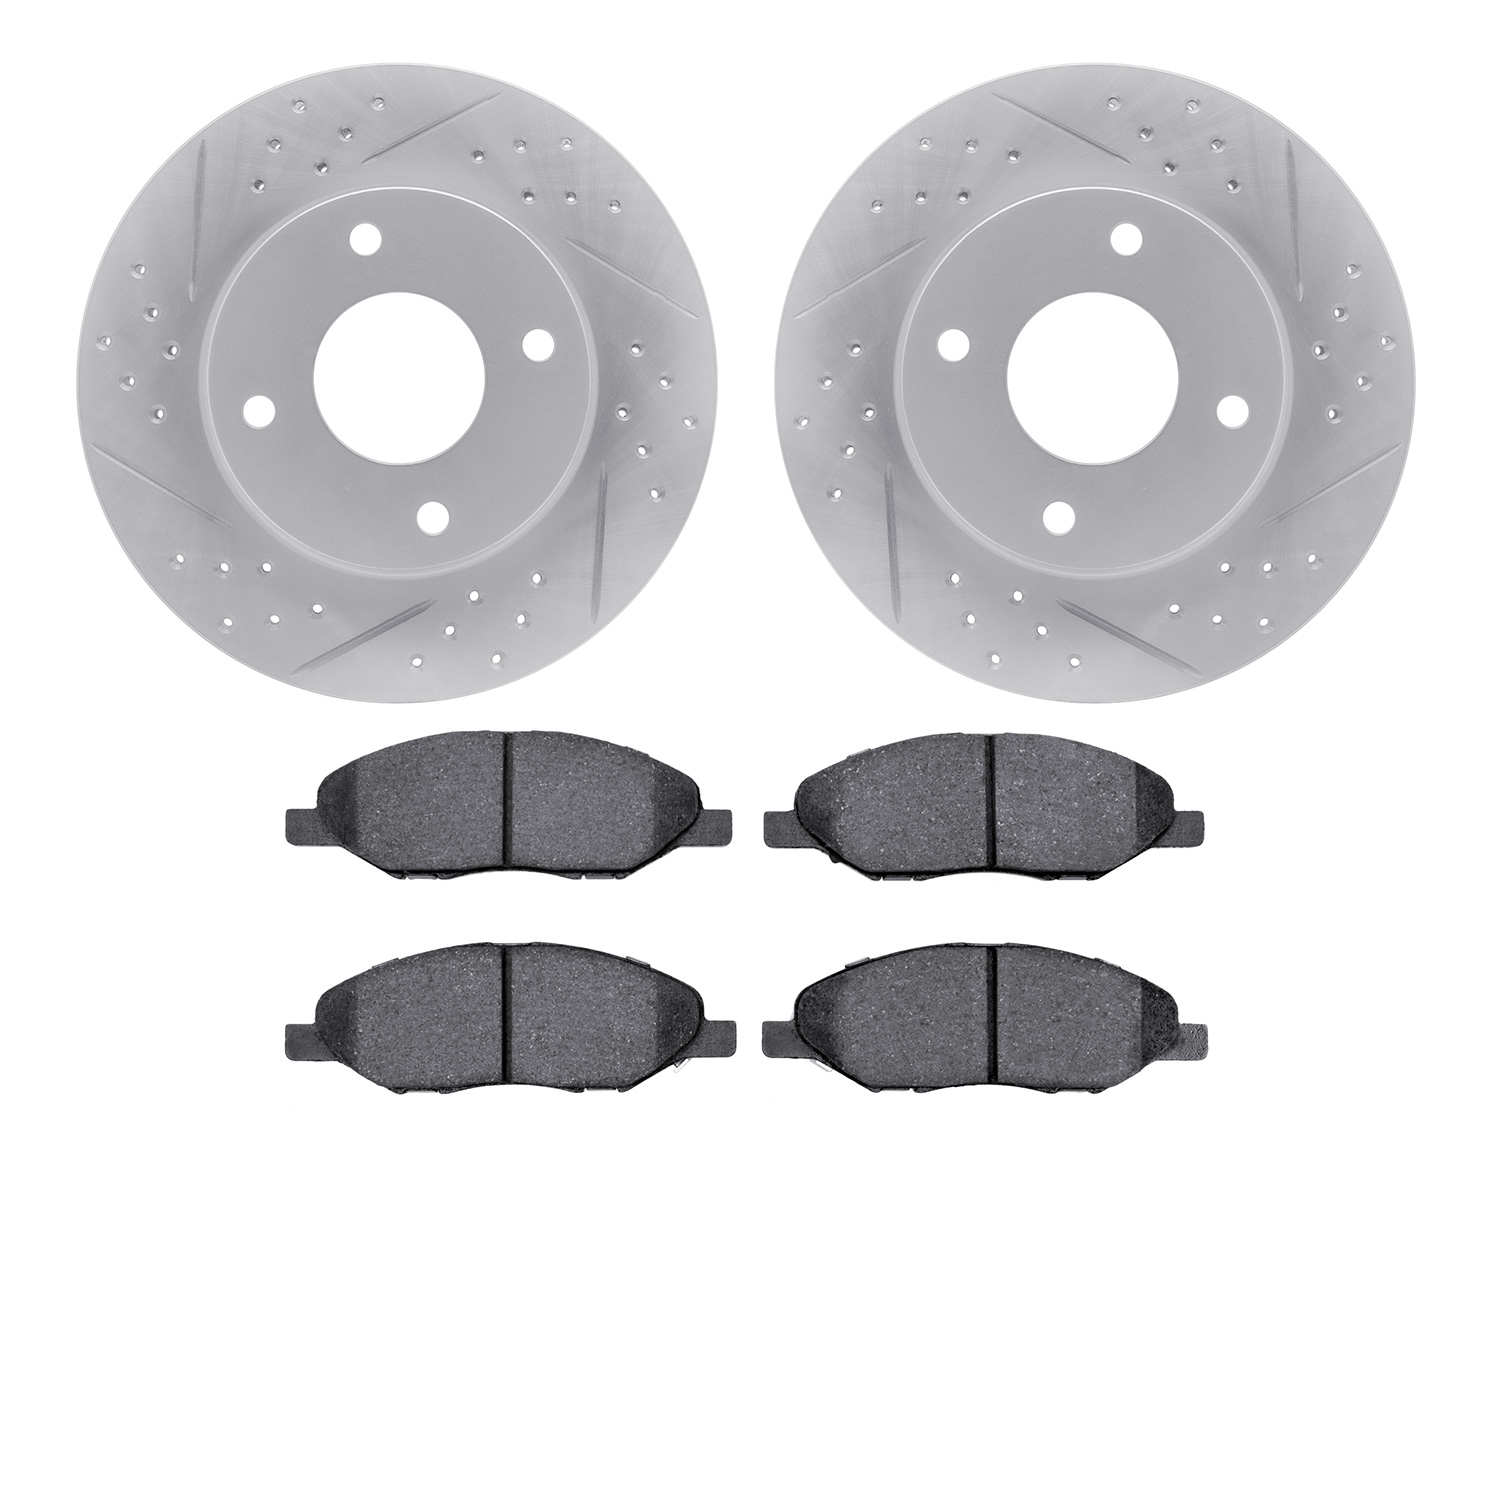 2502-67036 Geoperformance Drilled/Slotted Rotors w/5000 Advanced Brake Pads Kit, 2007-2017 Infiniti/Nissan, Position: Front